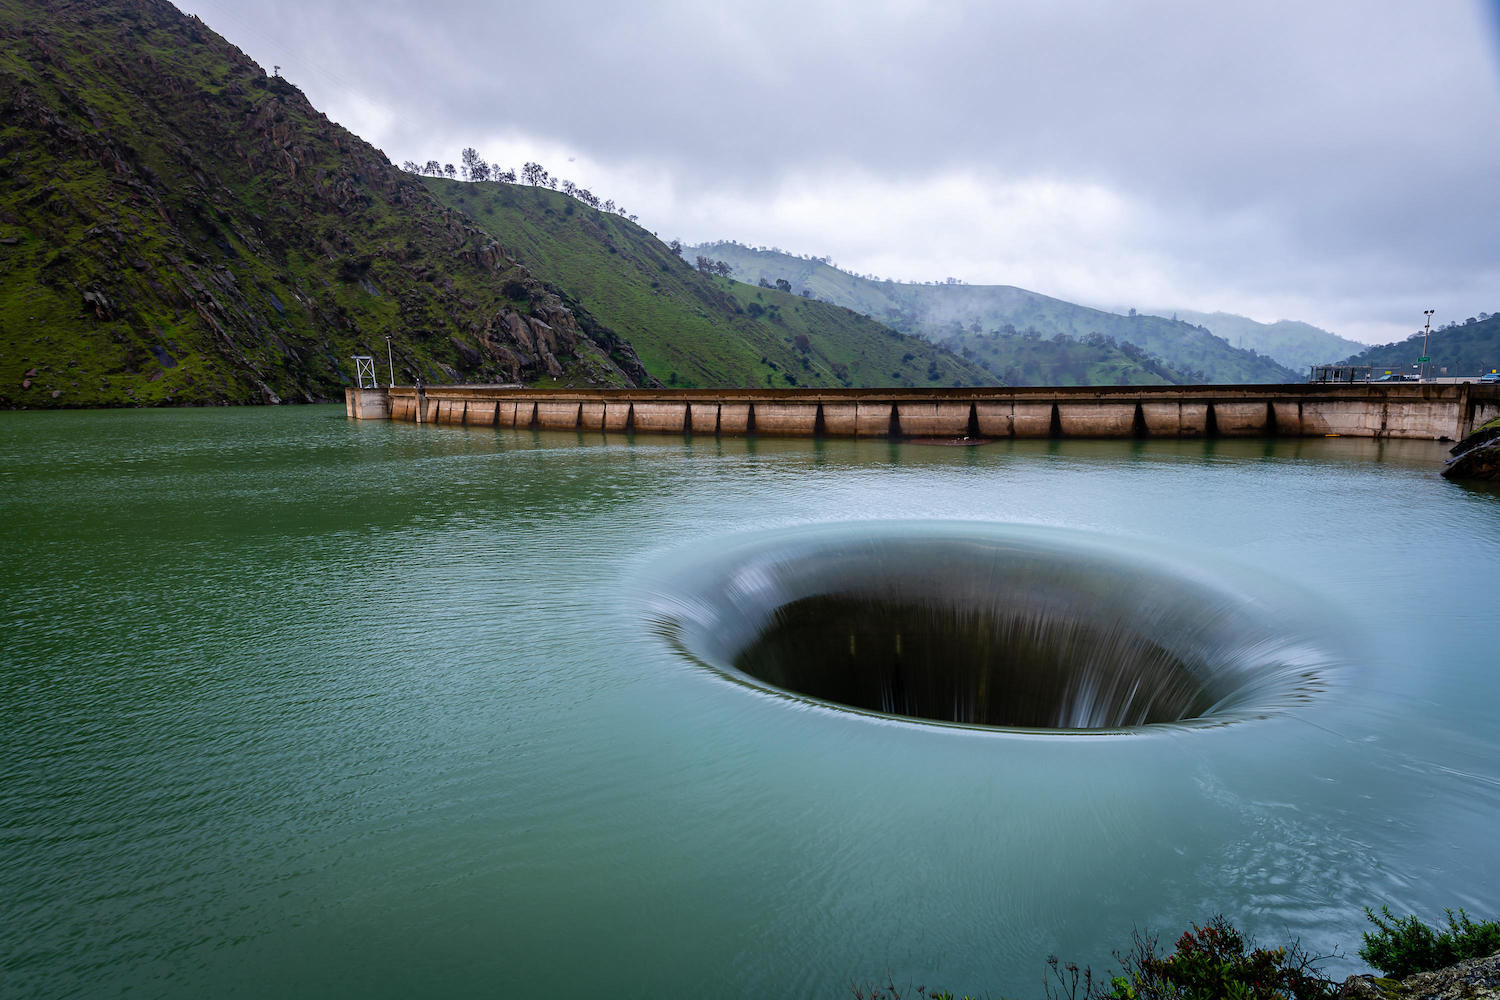 A whirlpool-type hole in the middle of a body of water surrounded by mountains